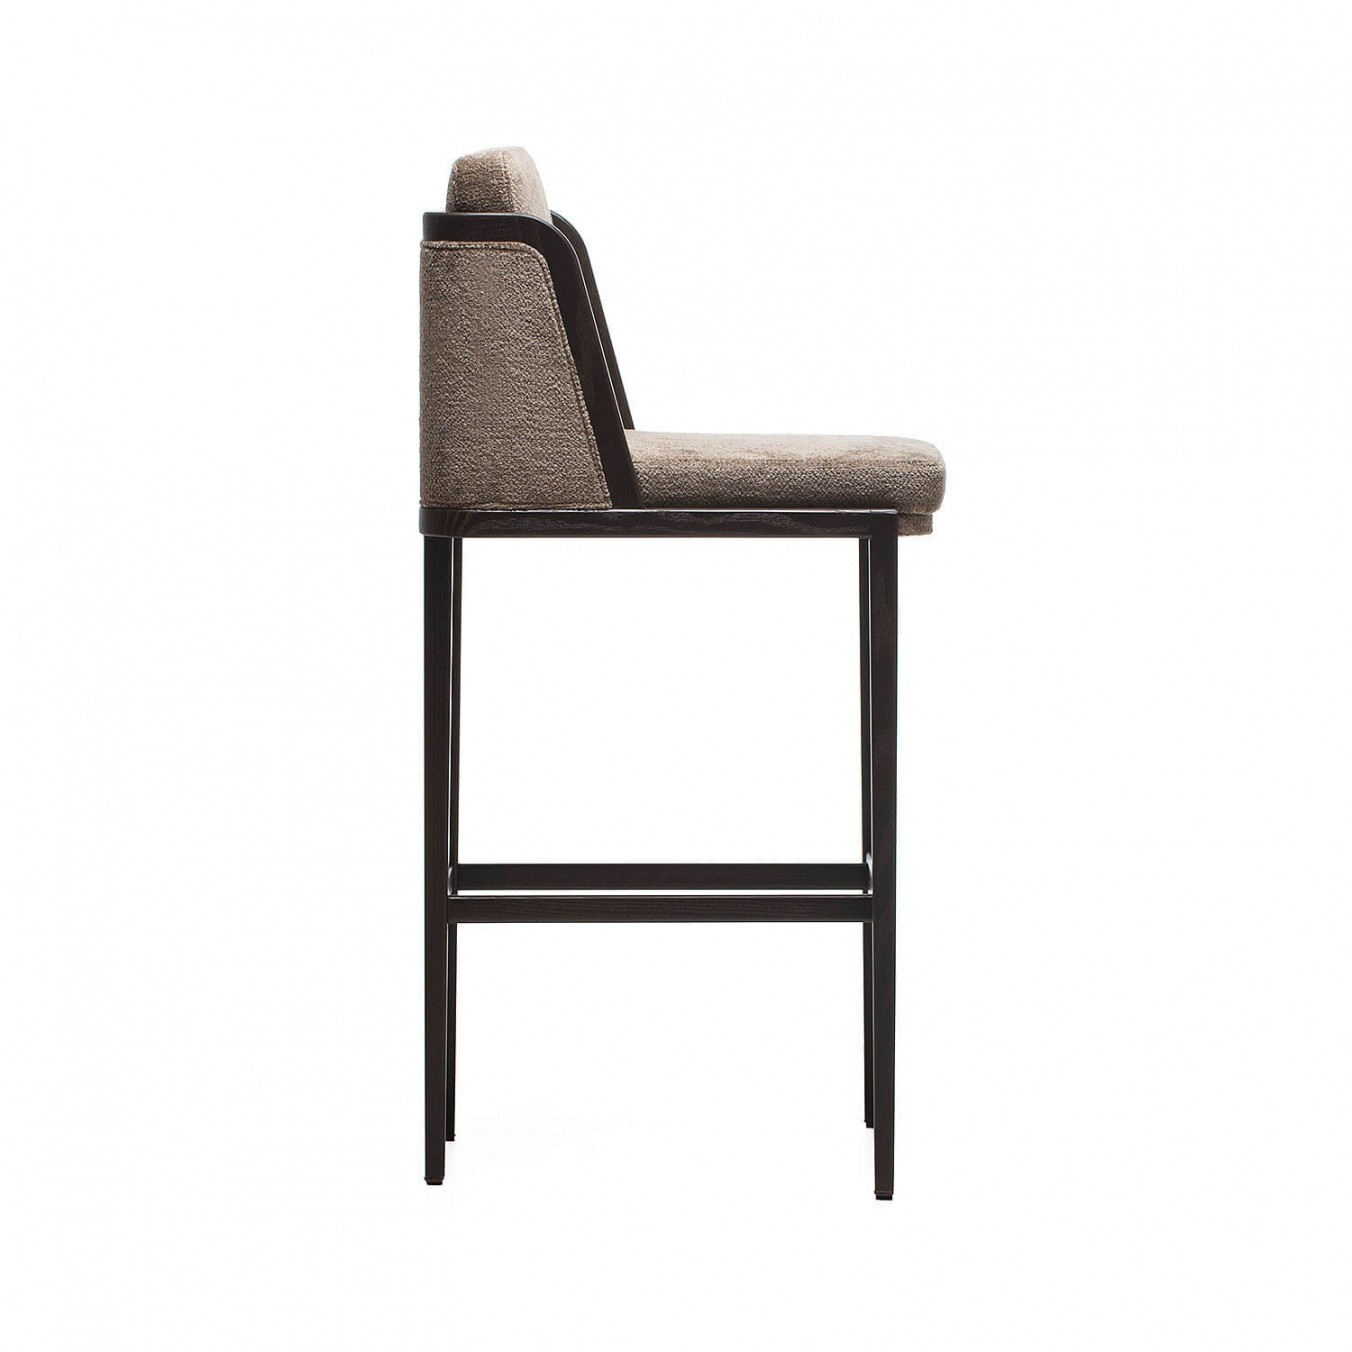 THRONE BARSTOOL WITH UPHOLSTERY